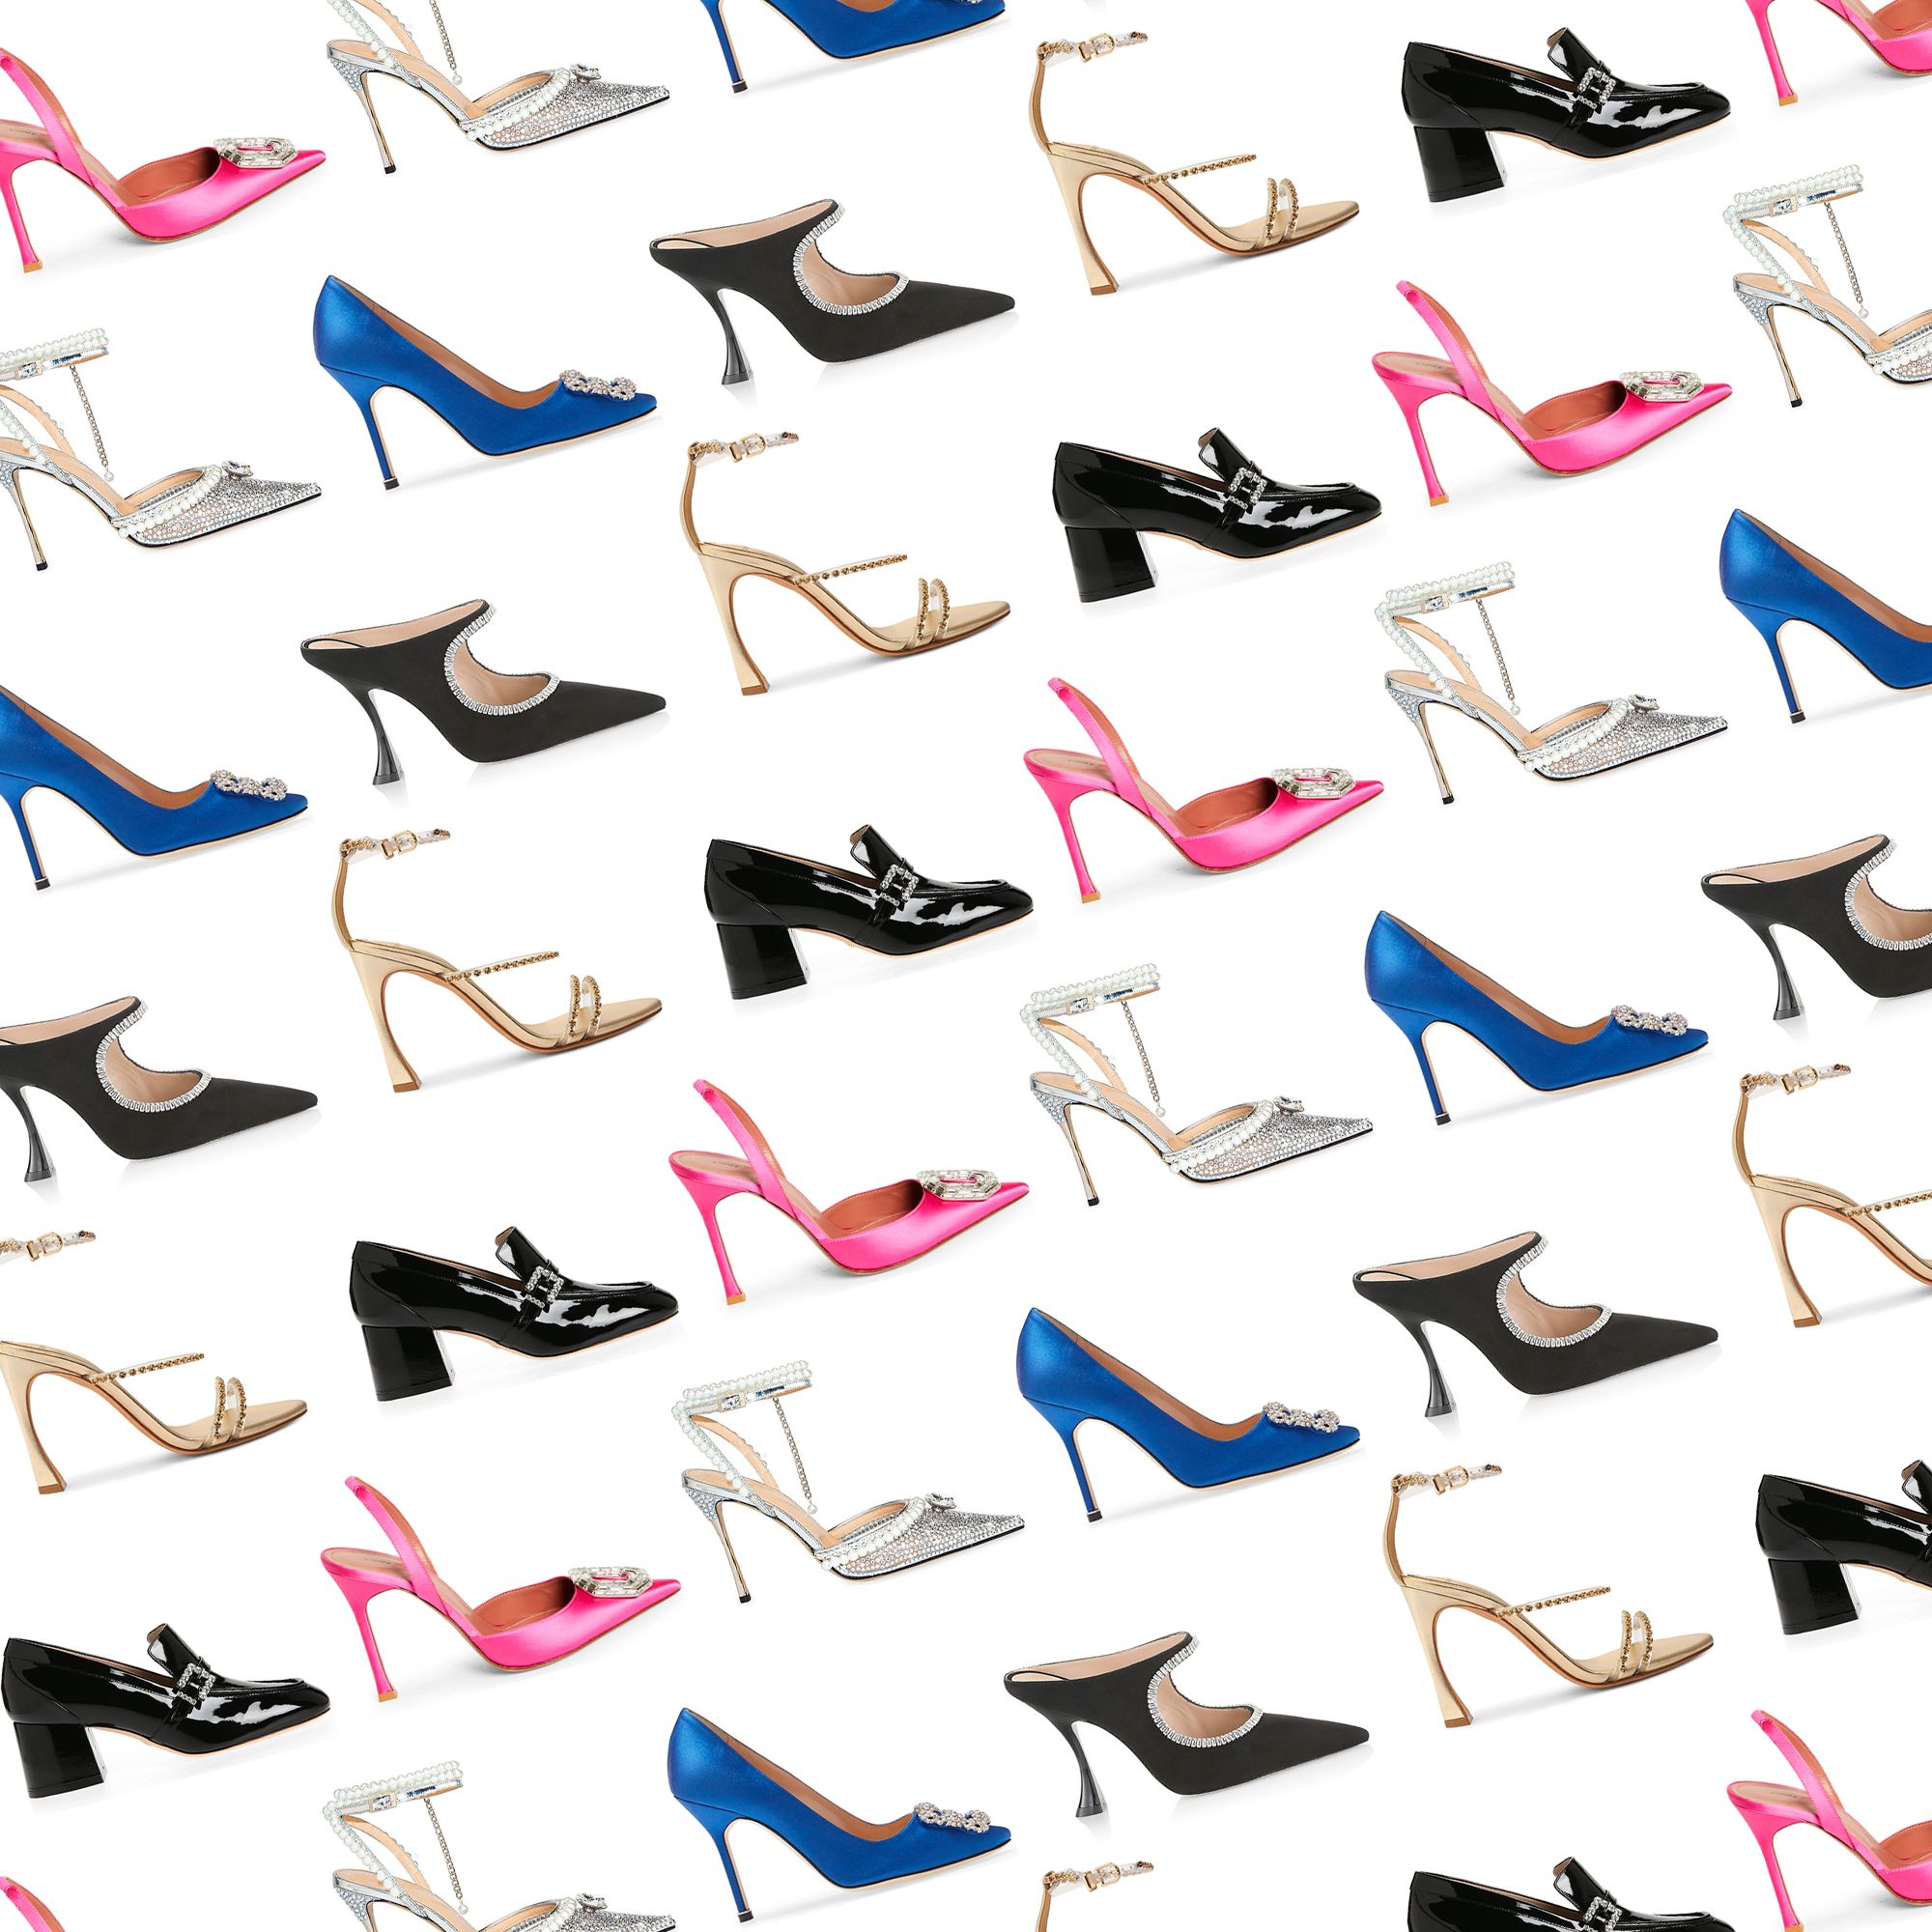 Can You Spot Which Shoe Is the Real $1,700 Designer Brand?